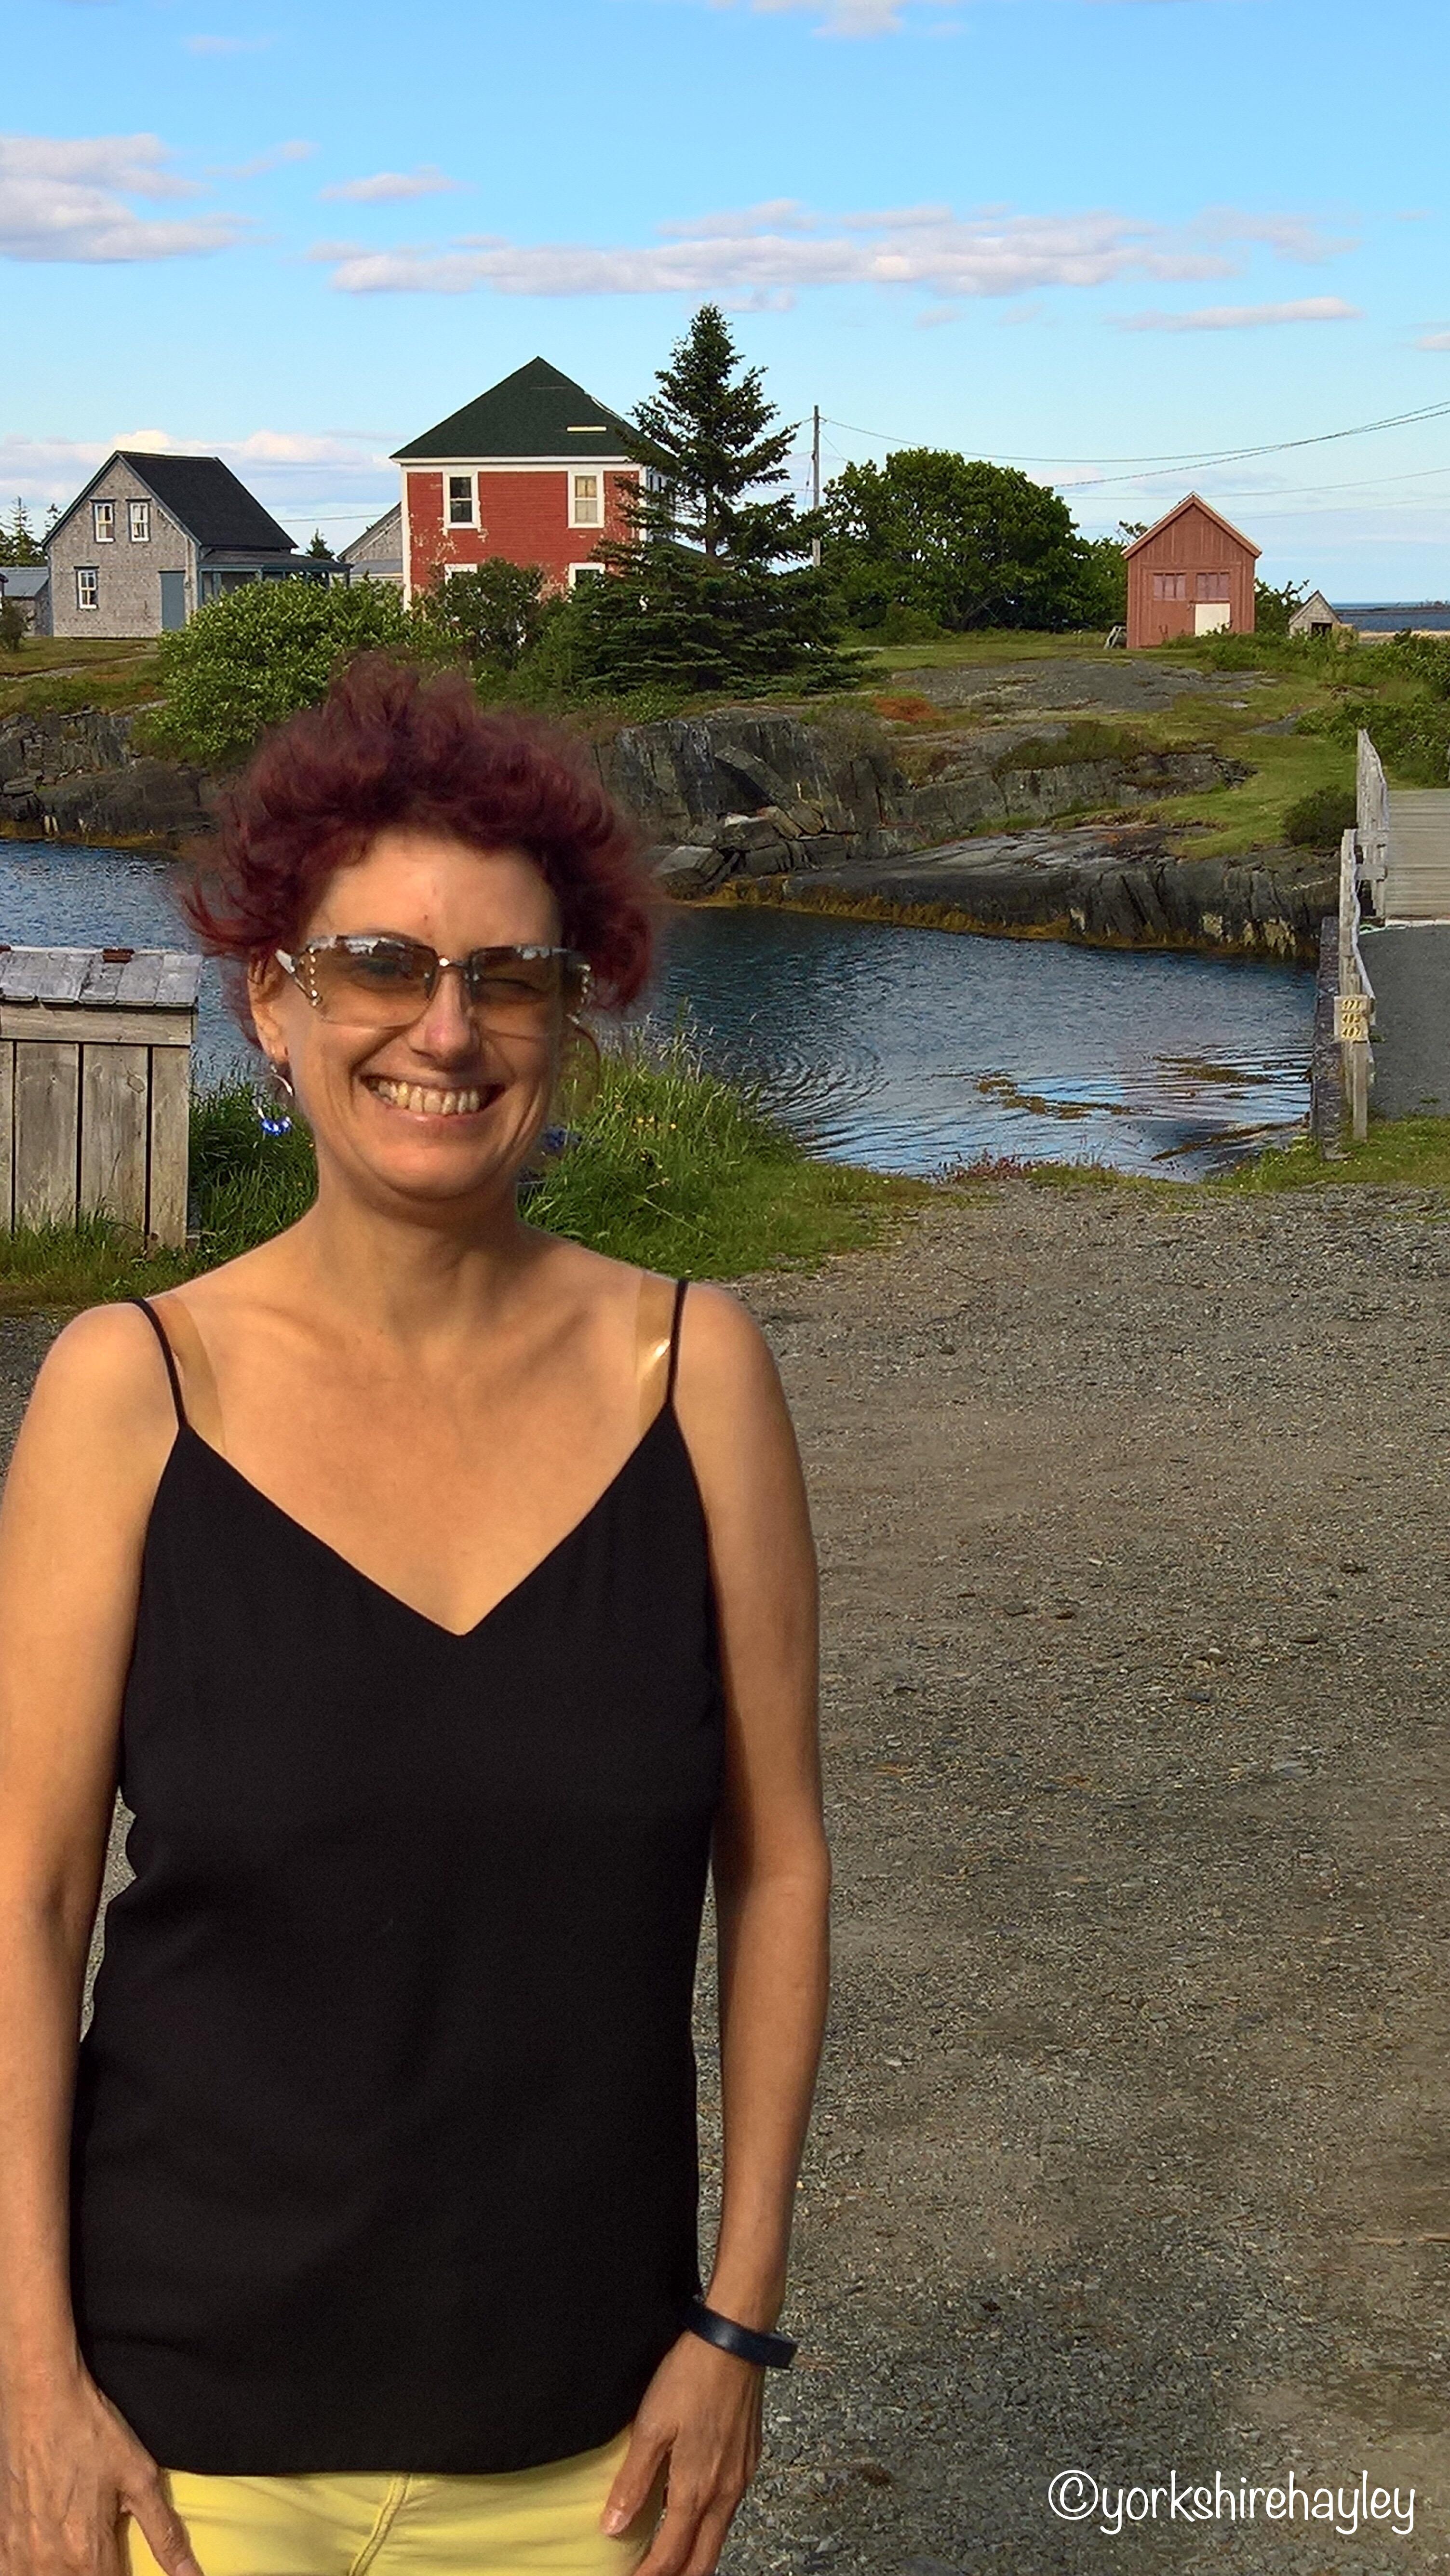 In Stonehurst Cove with the red house used in the Jesse Stone movies behind me